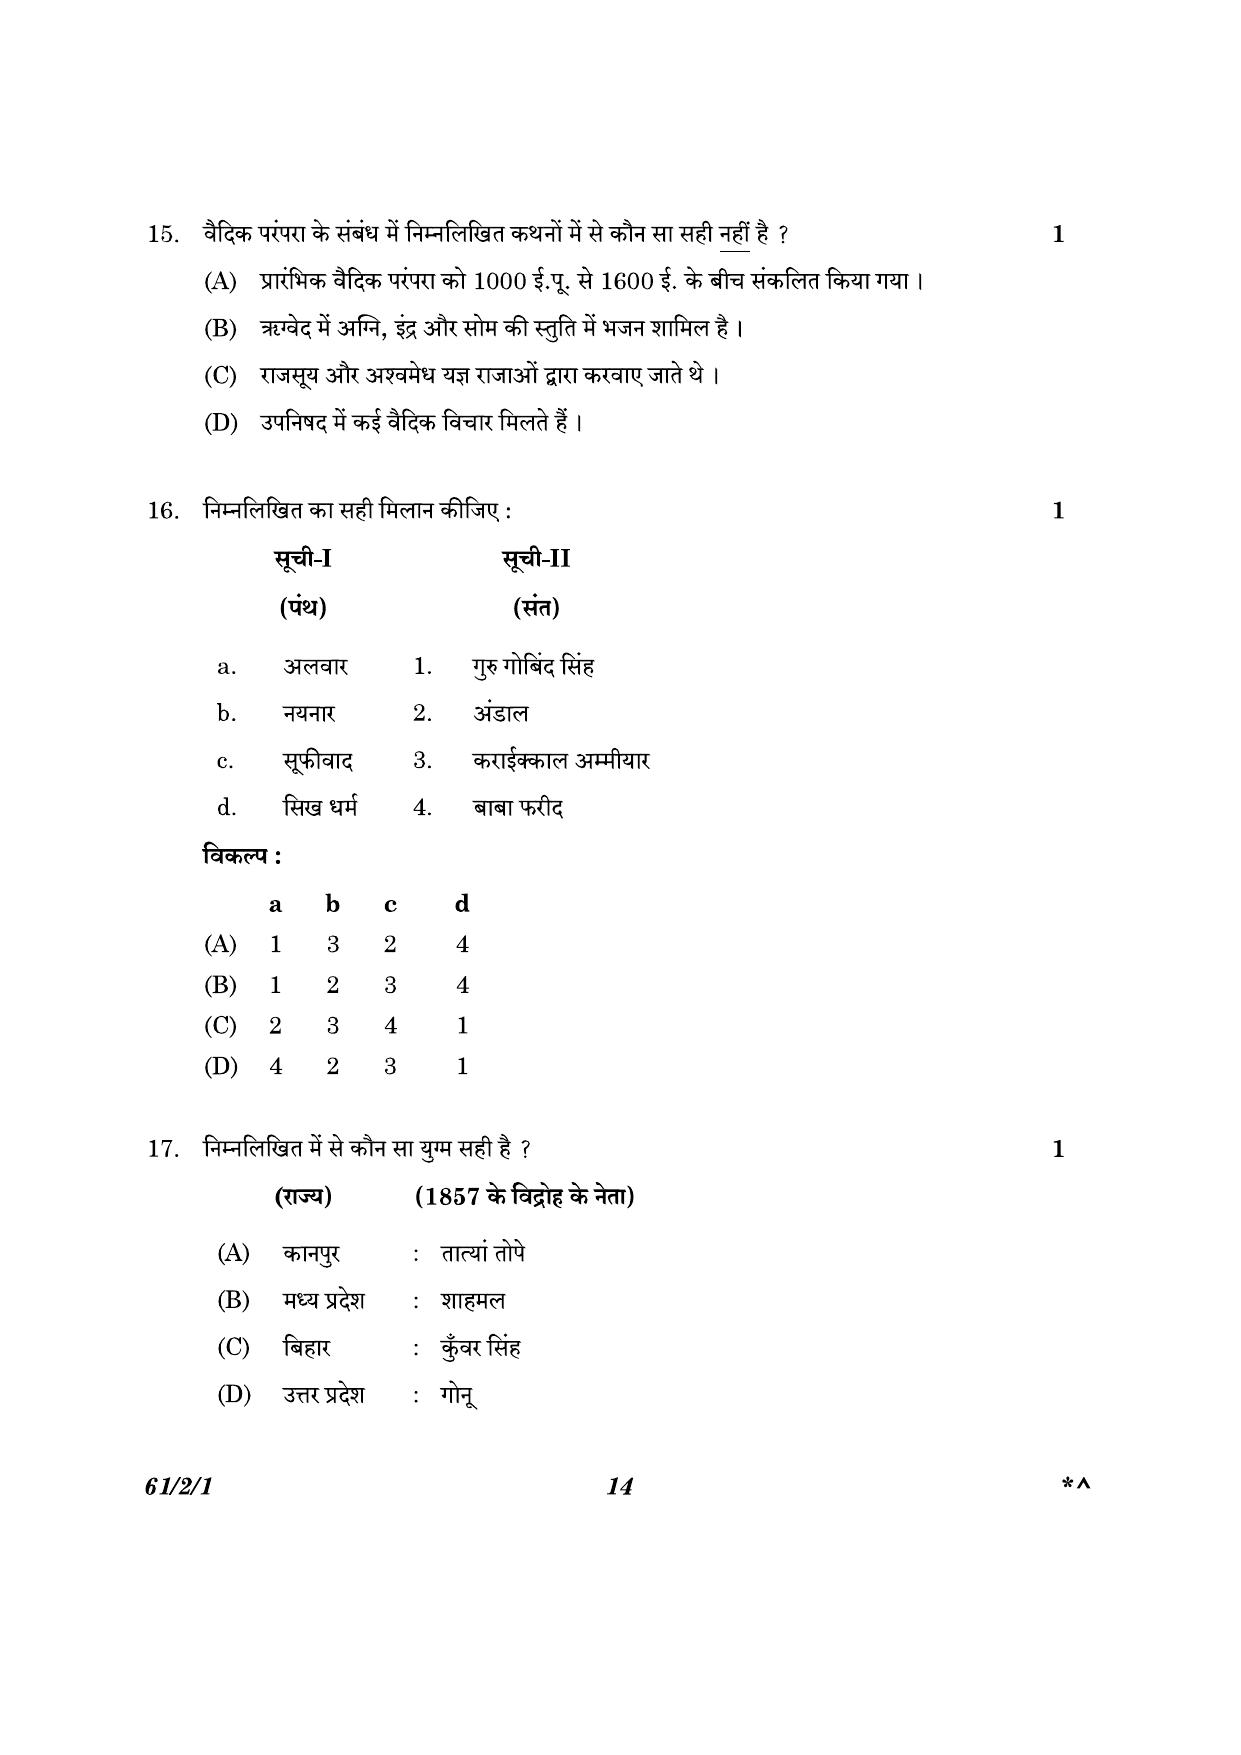 CBSE Class 12 61-2-1 History 2023 Question Paper - Page 14